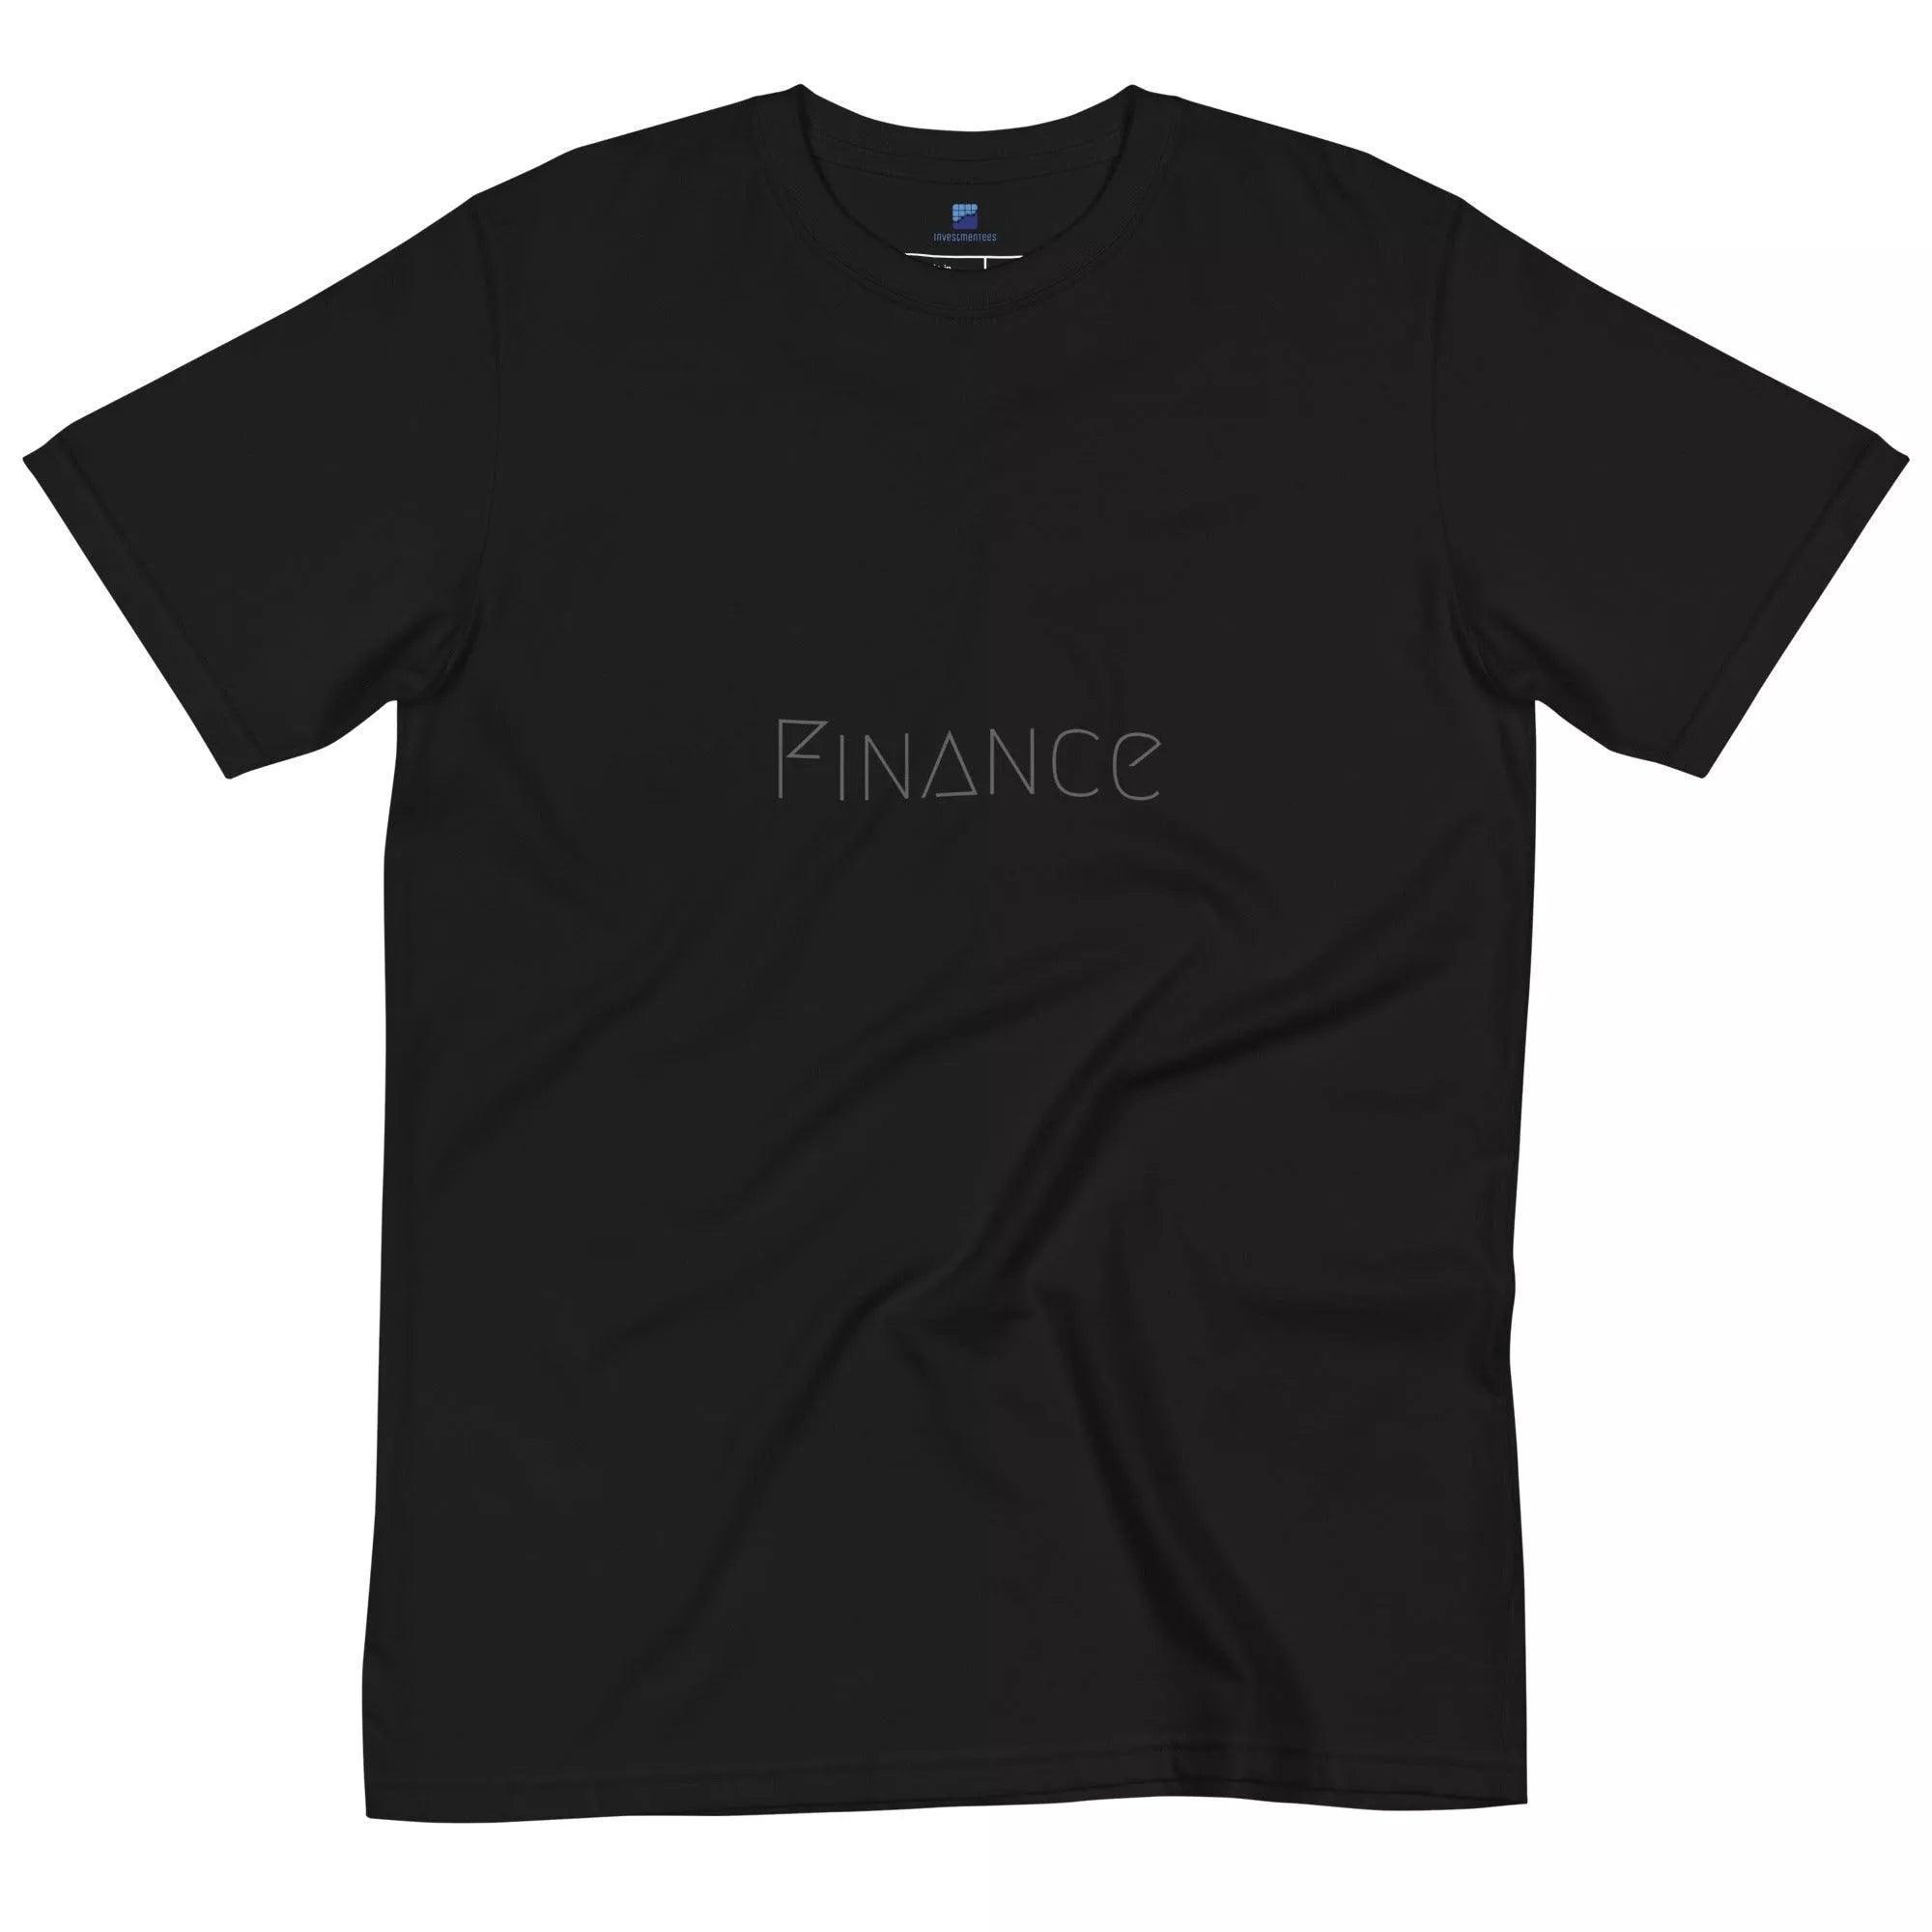 The Wise Investor | Finance T-Shirt - InvestmenTees